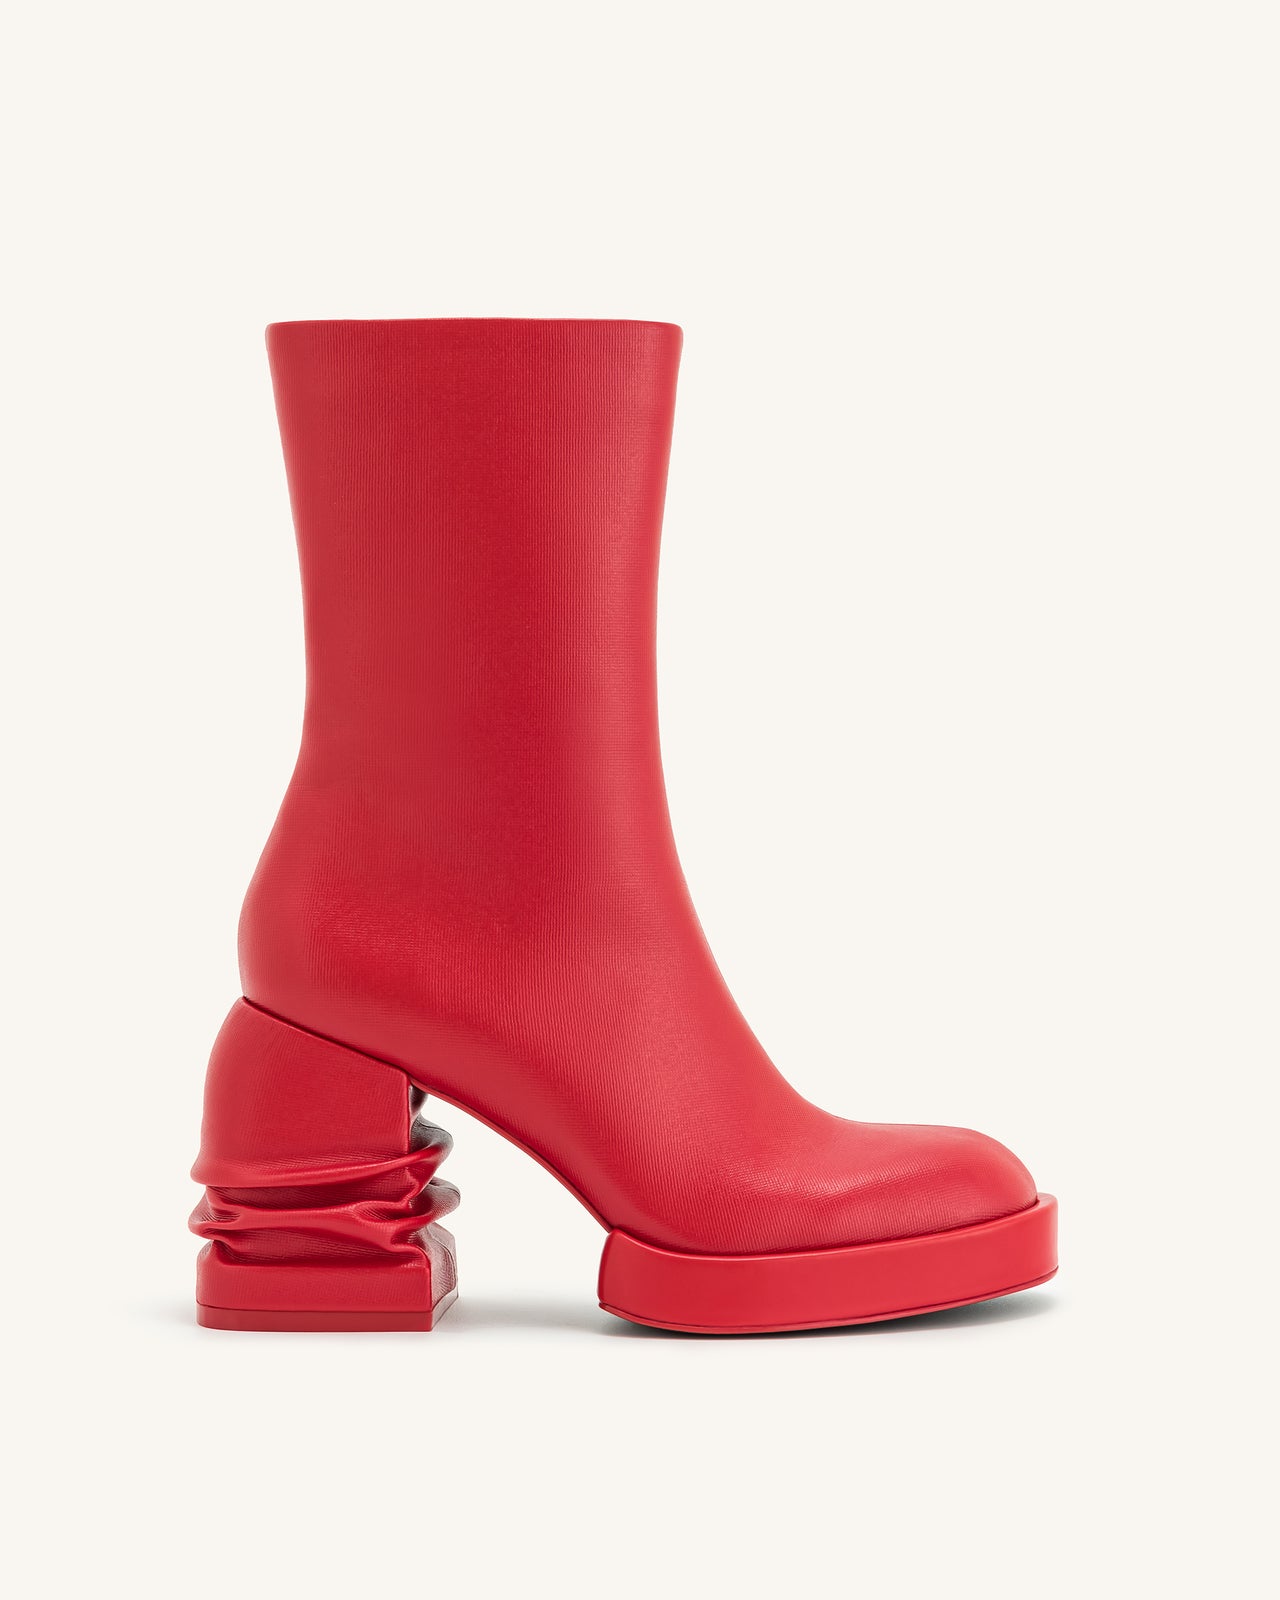 Saylor Round Toe Platform Ankle Boots - Red